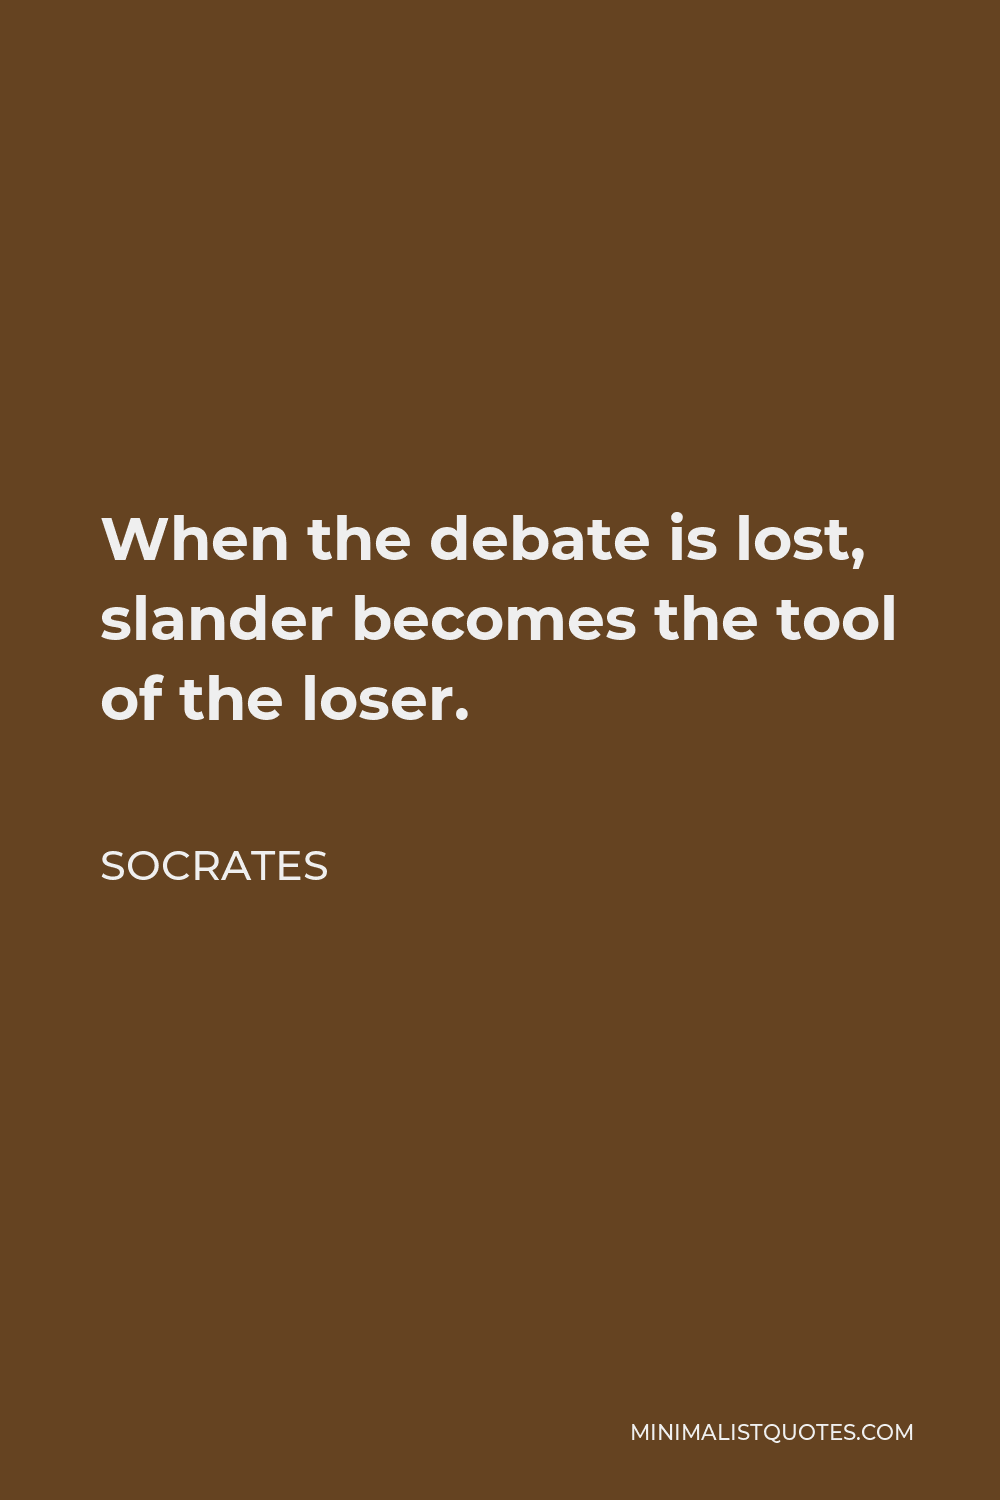 Socrates Quote - When the debate is lost, slander becomes the tool of the loser.